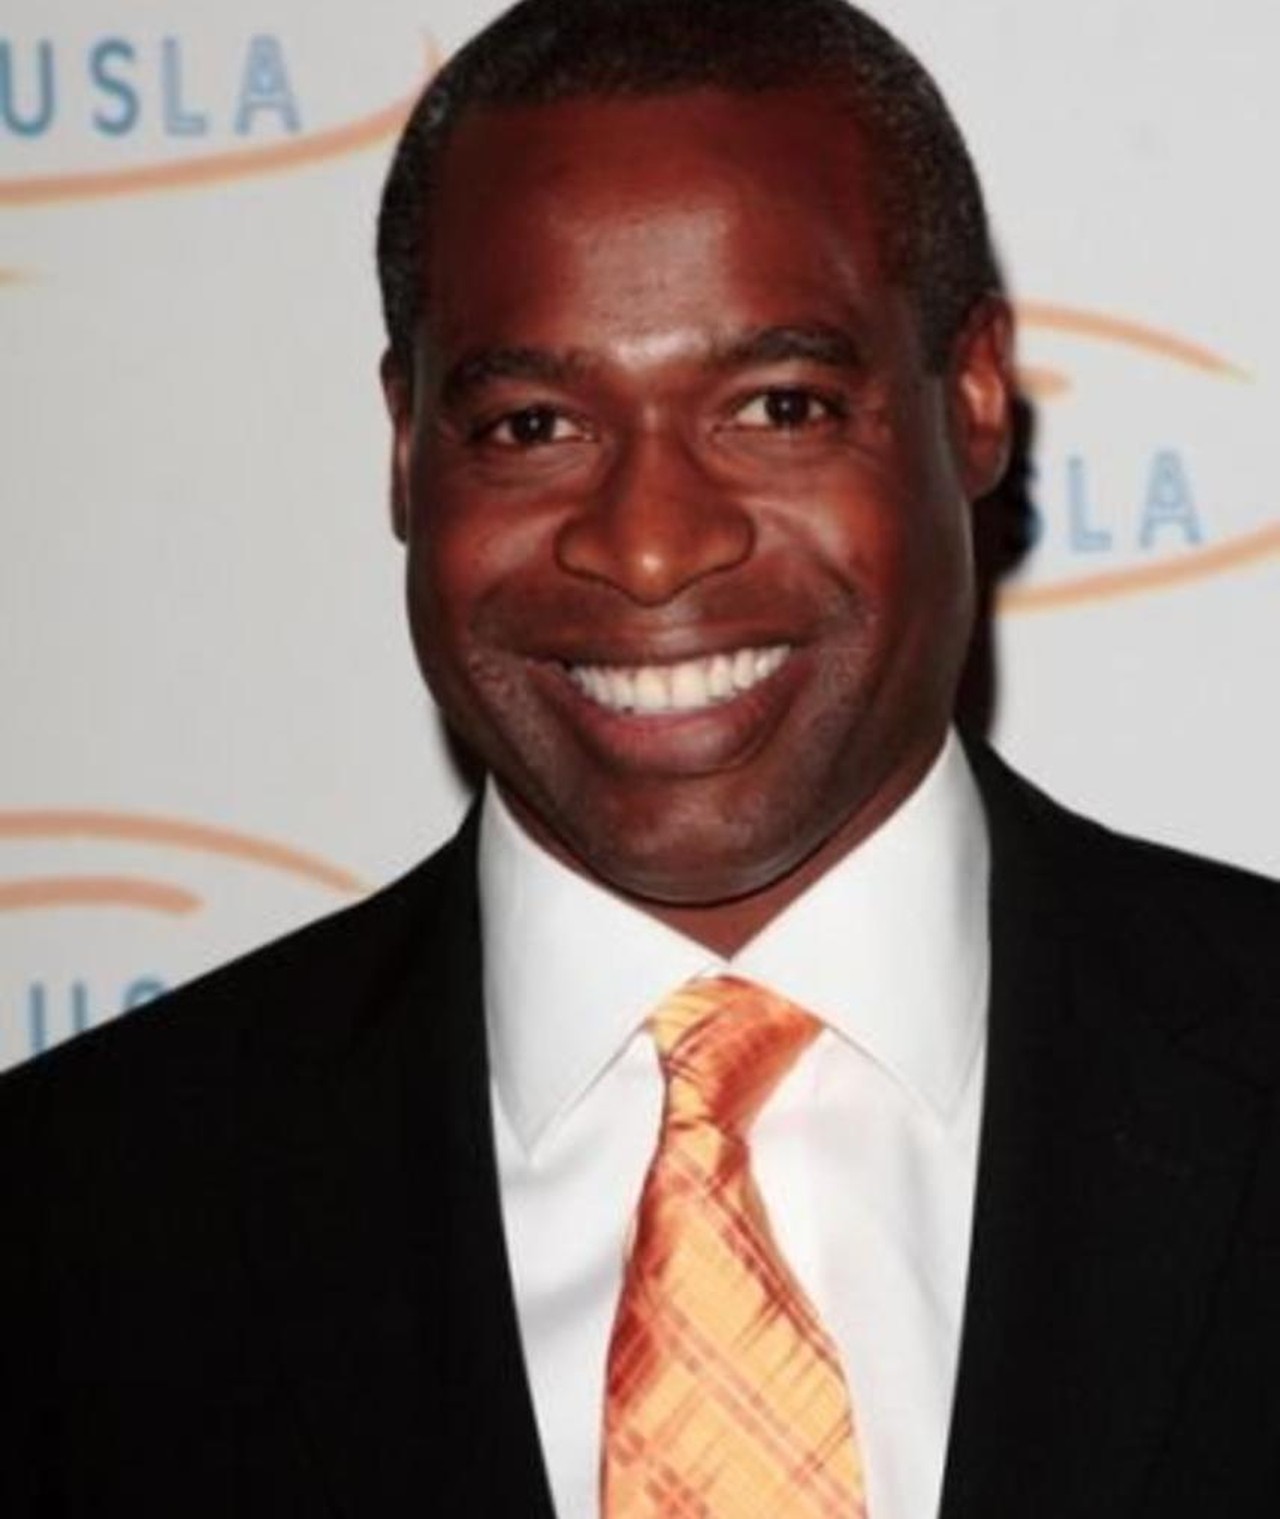 Phill lewis wife